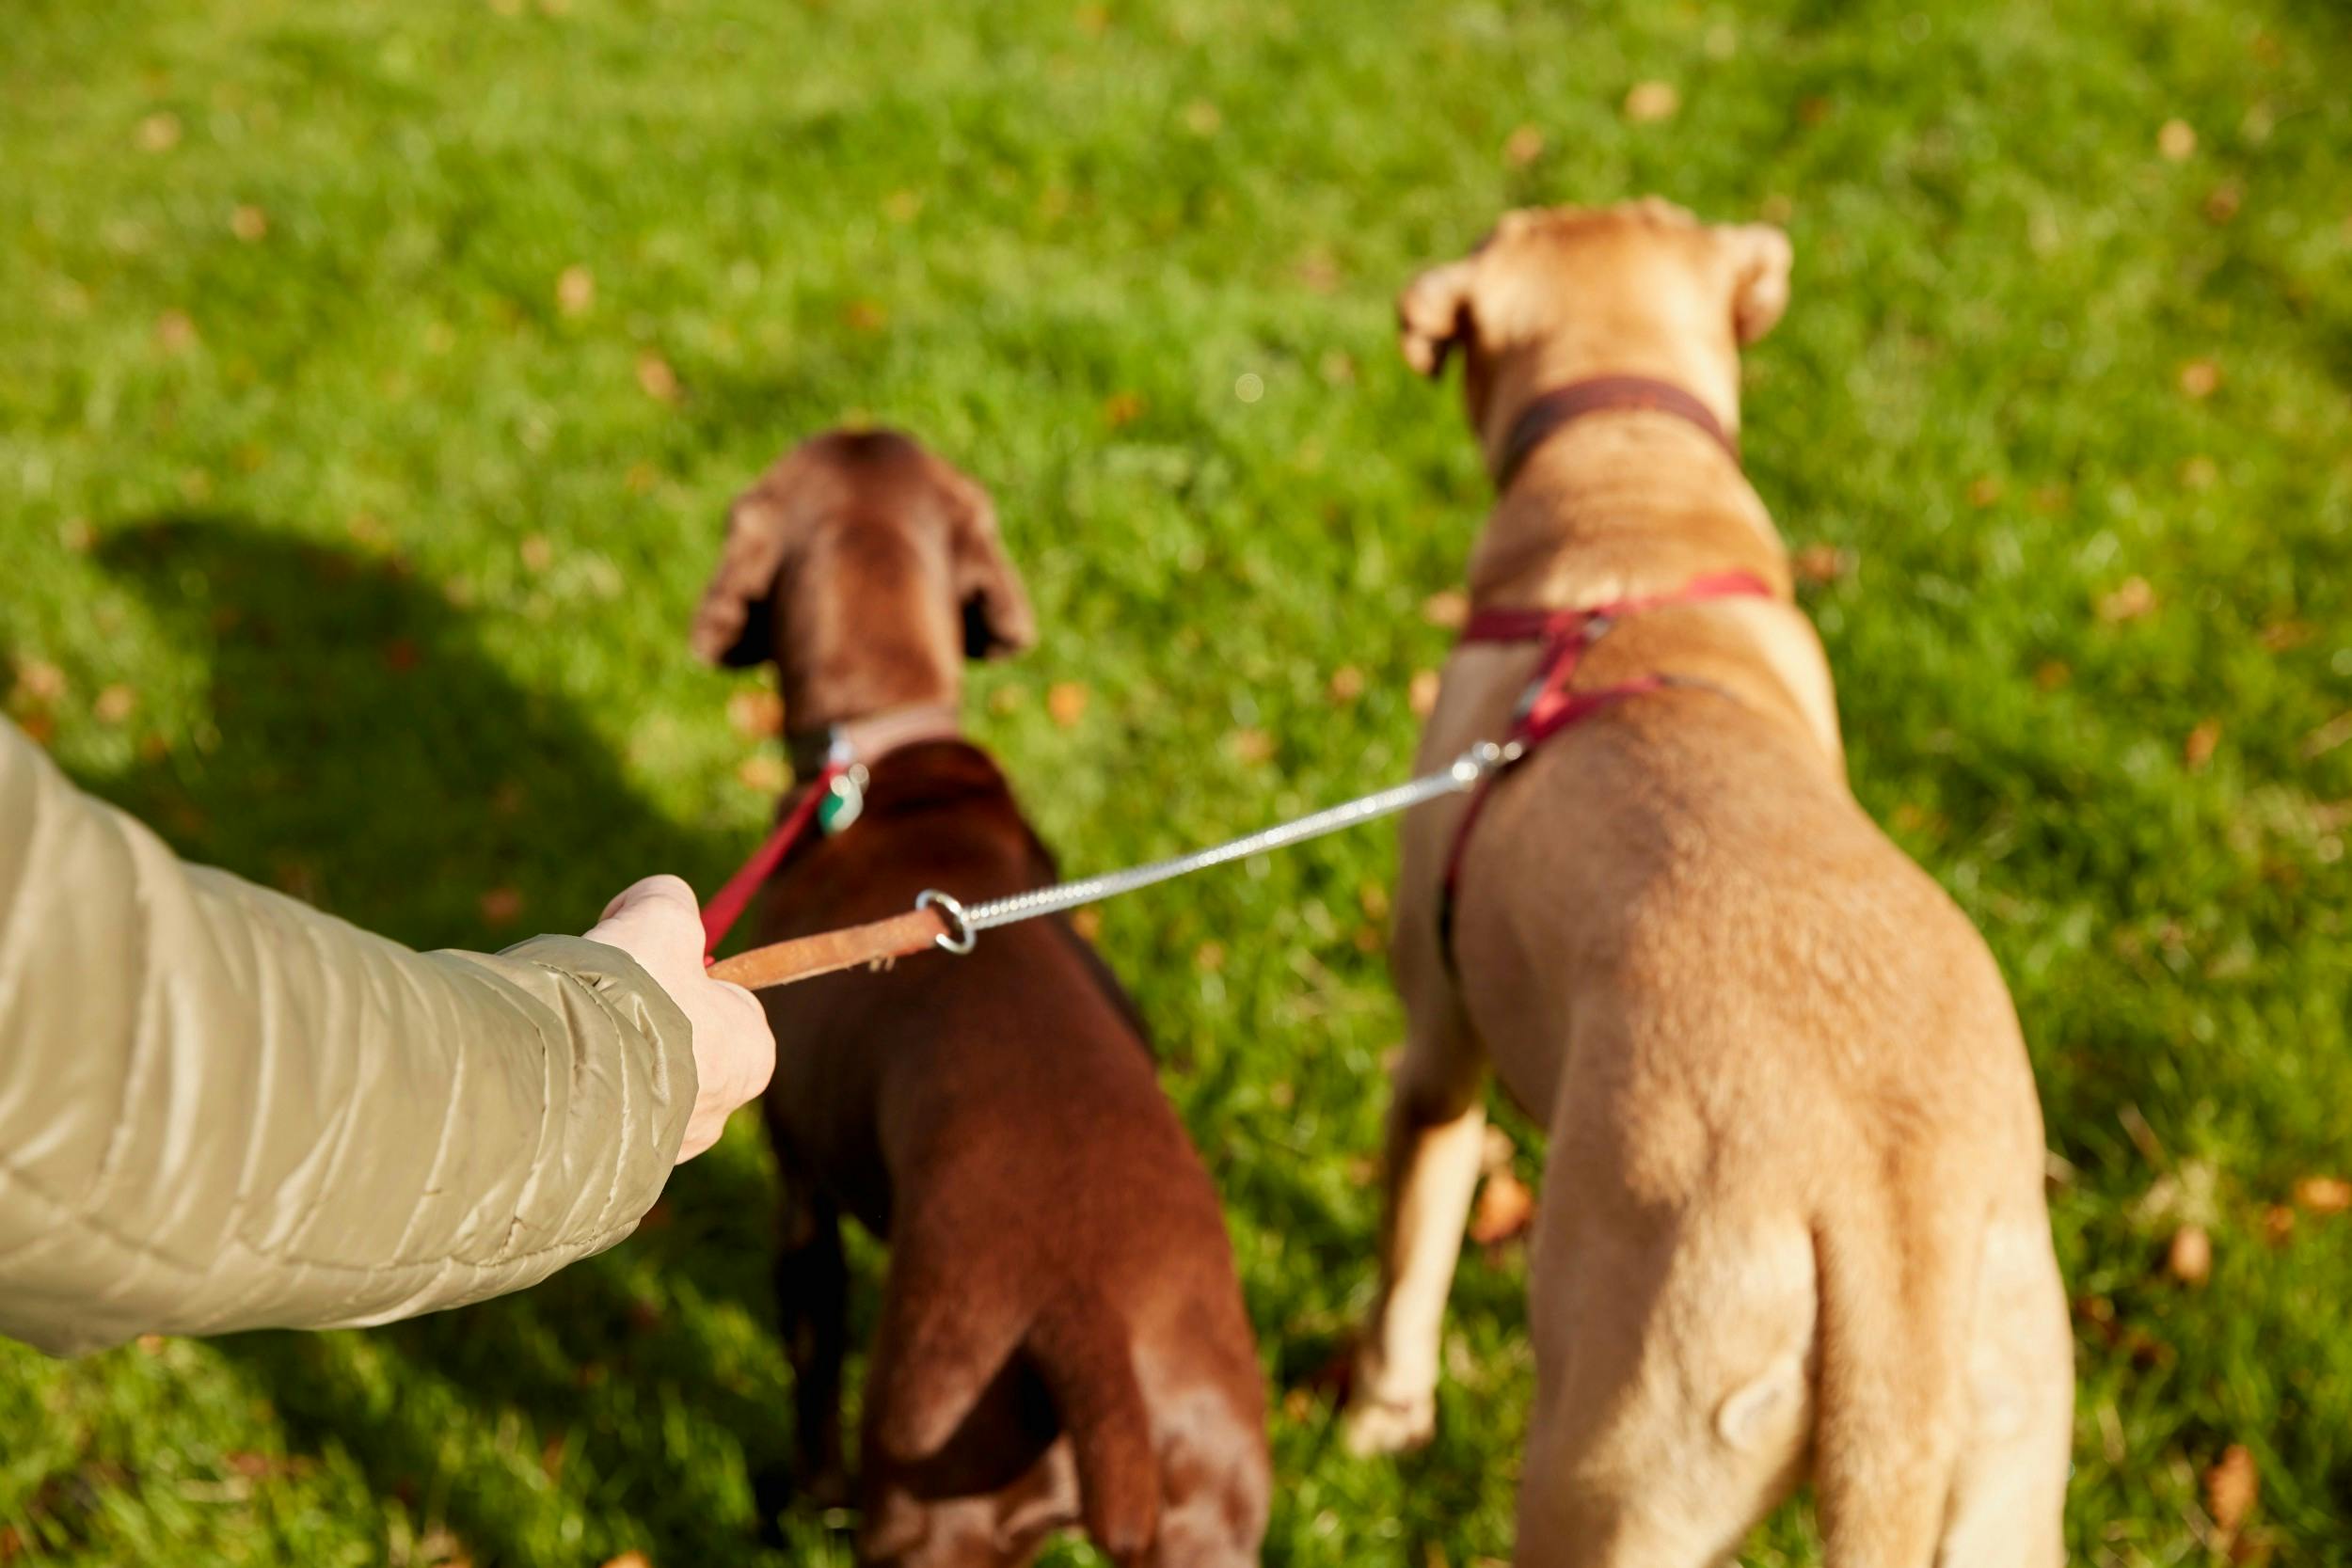 Preparing your nervous dog to be alone with a sitter or dog walker